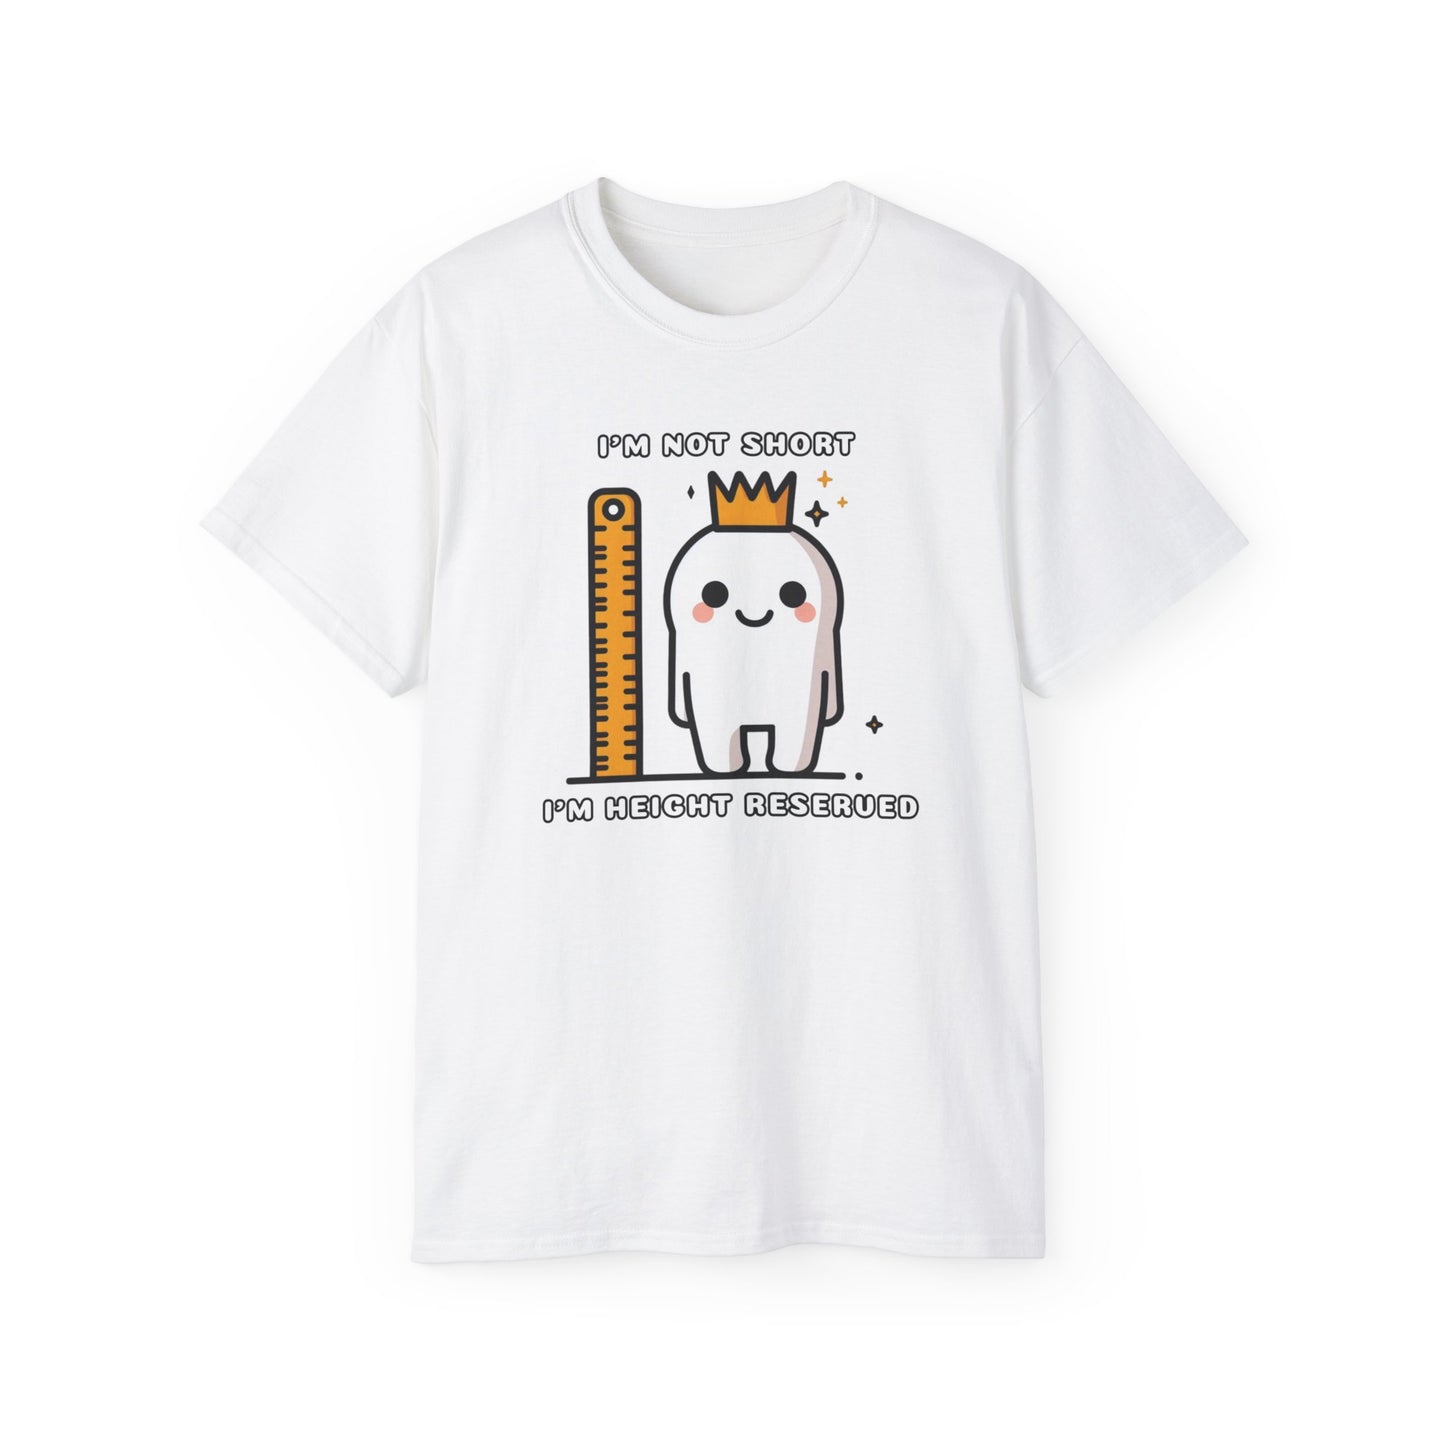 Vertically Challenged, Height Reserved! Unisex Ultra Cotton Tee